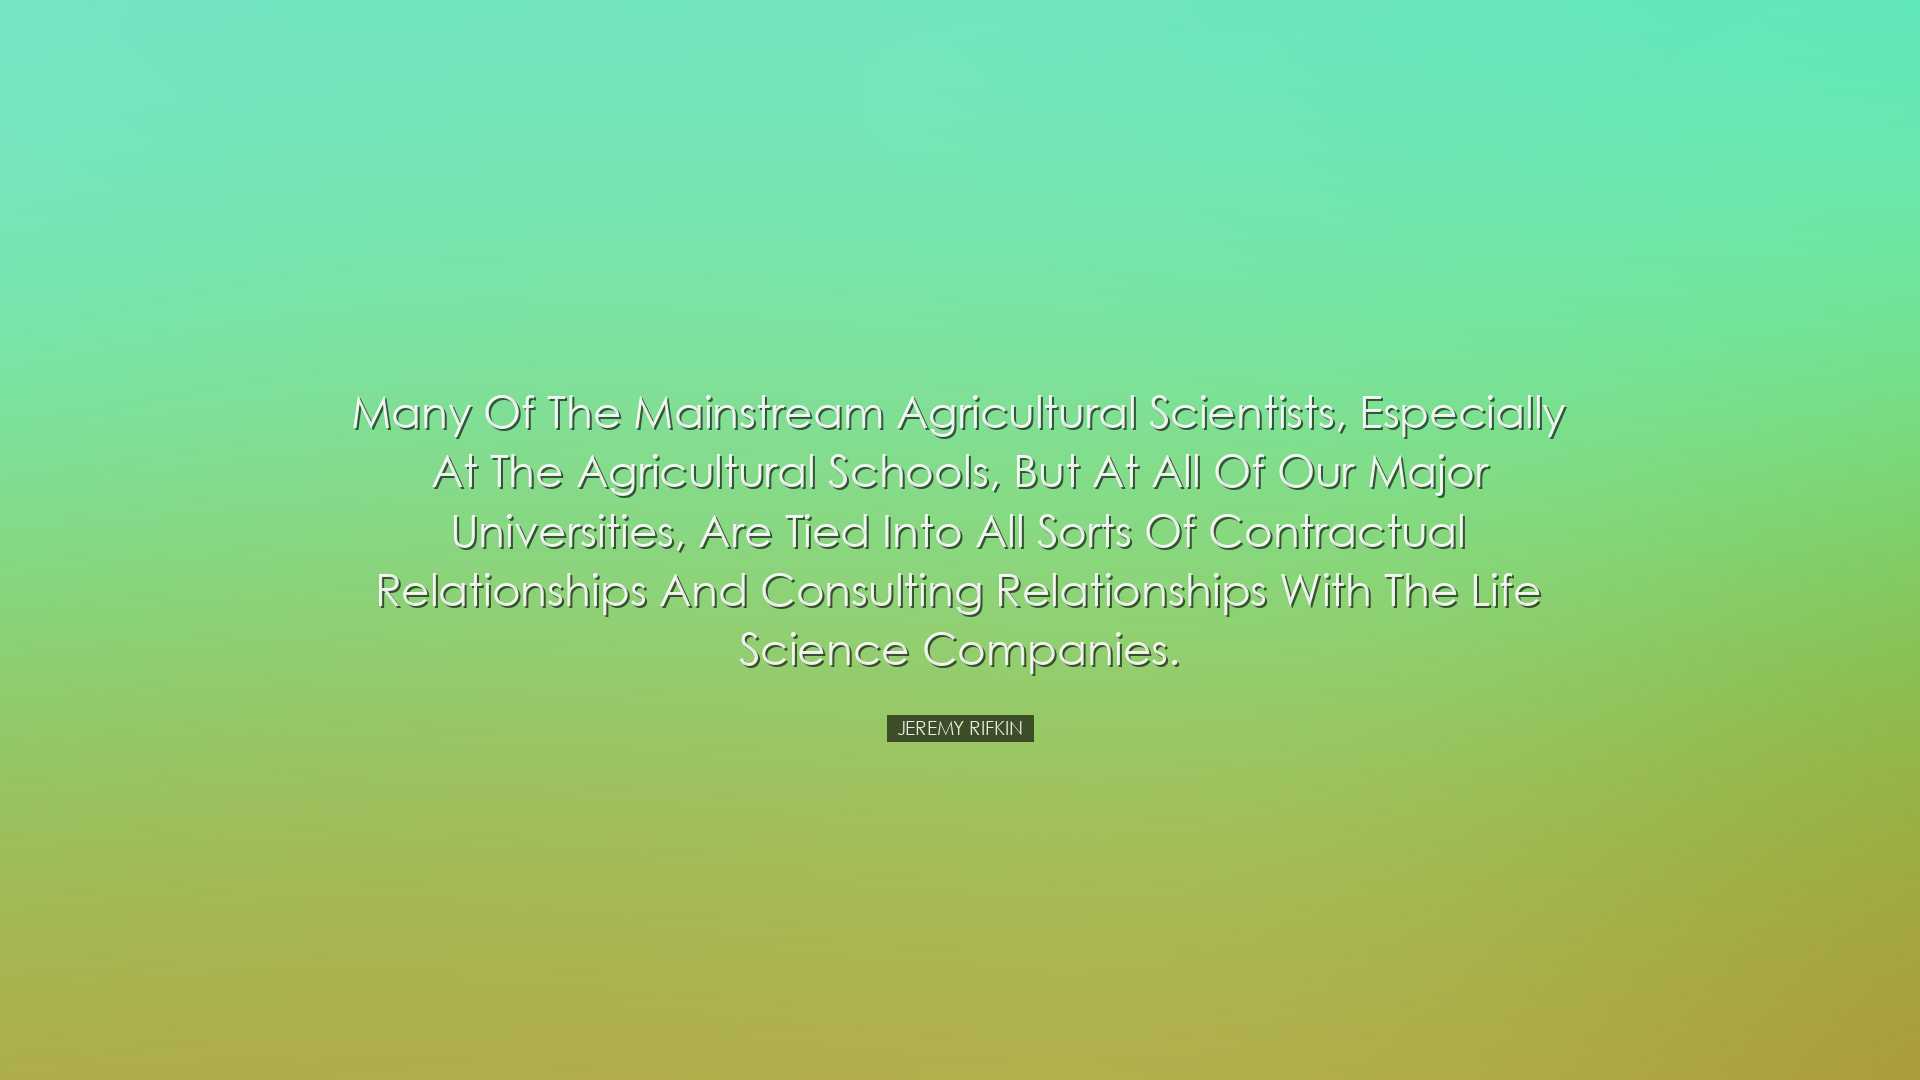 Many of the mainstream agricultural scientists, especially at the